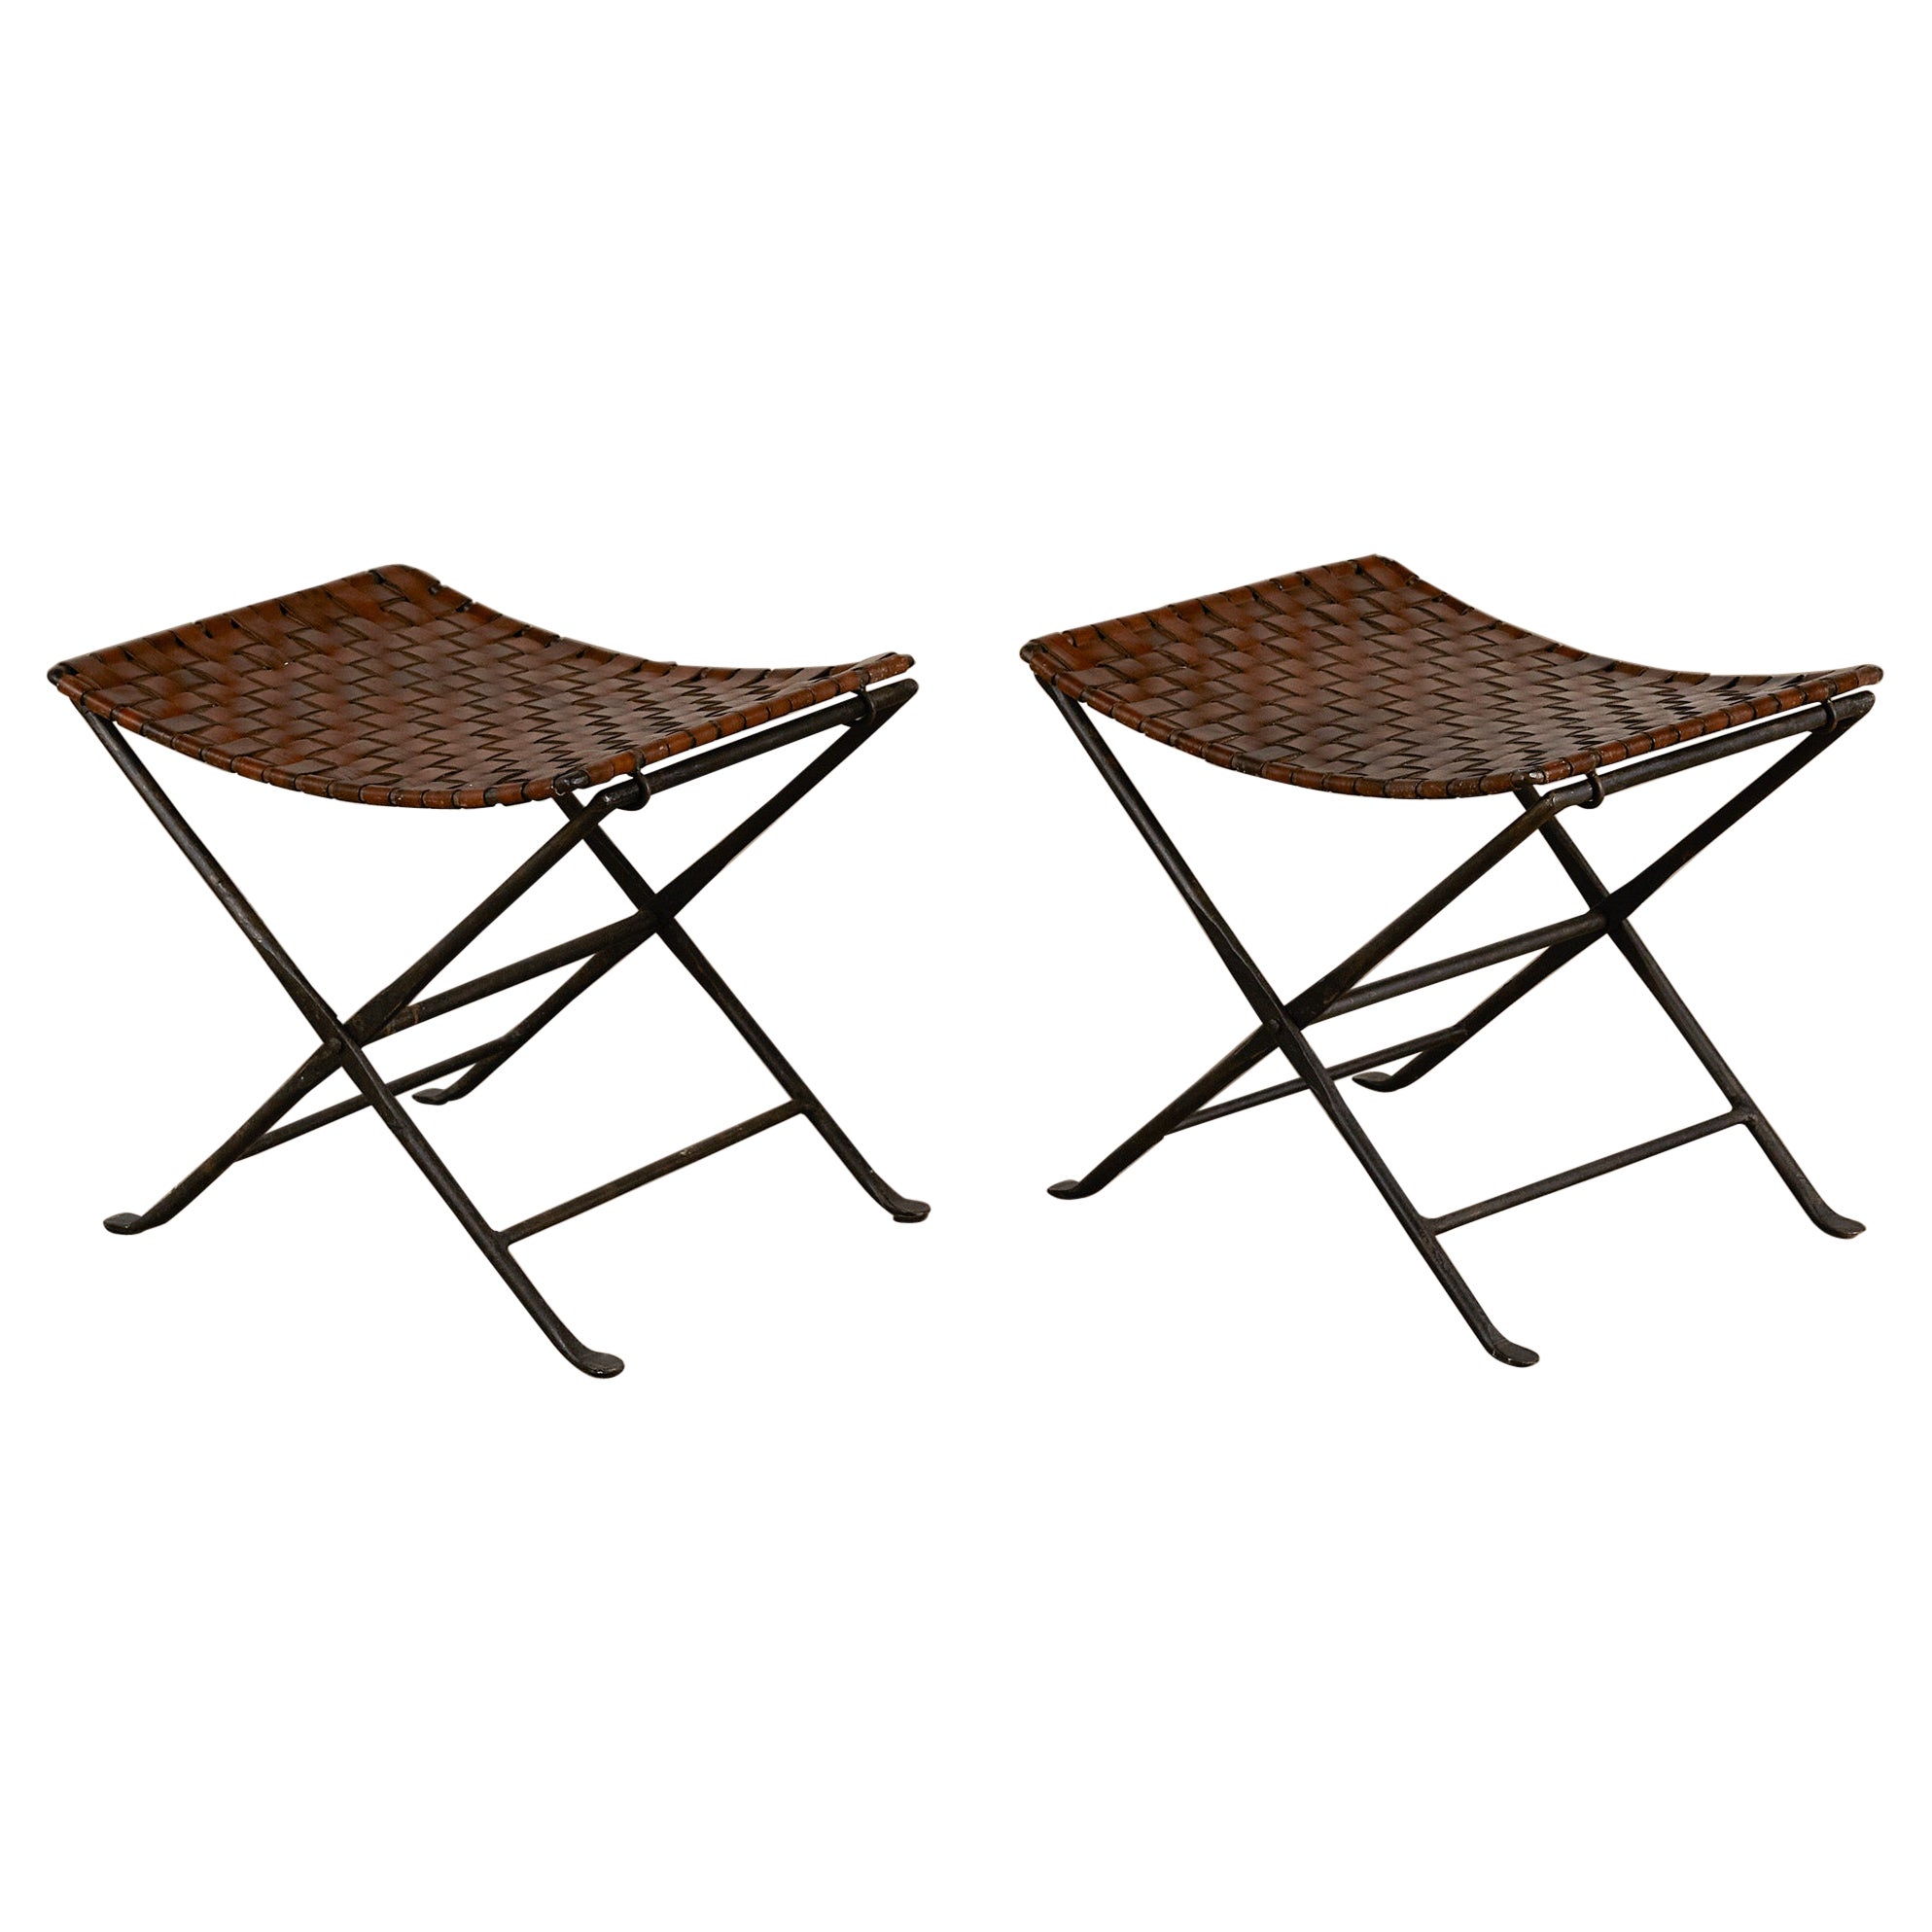 Pair of Woven Leather Folding Stools